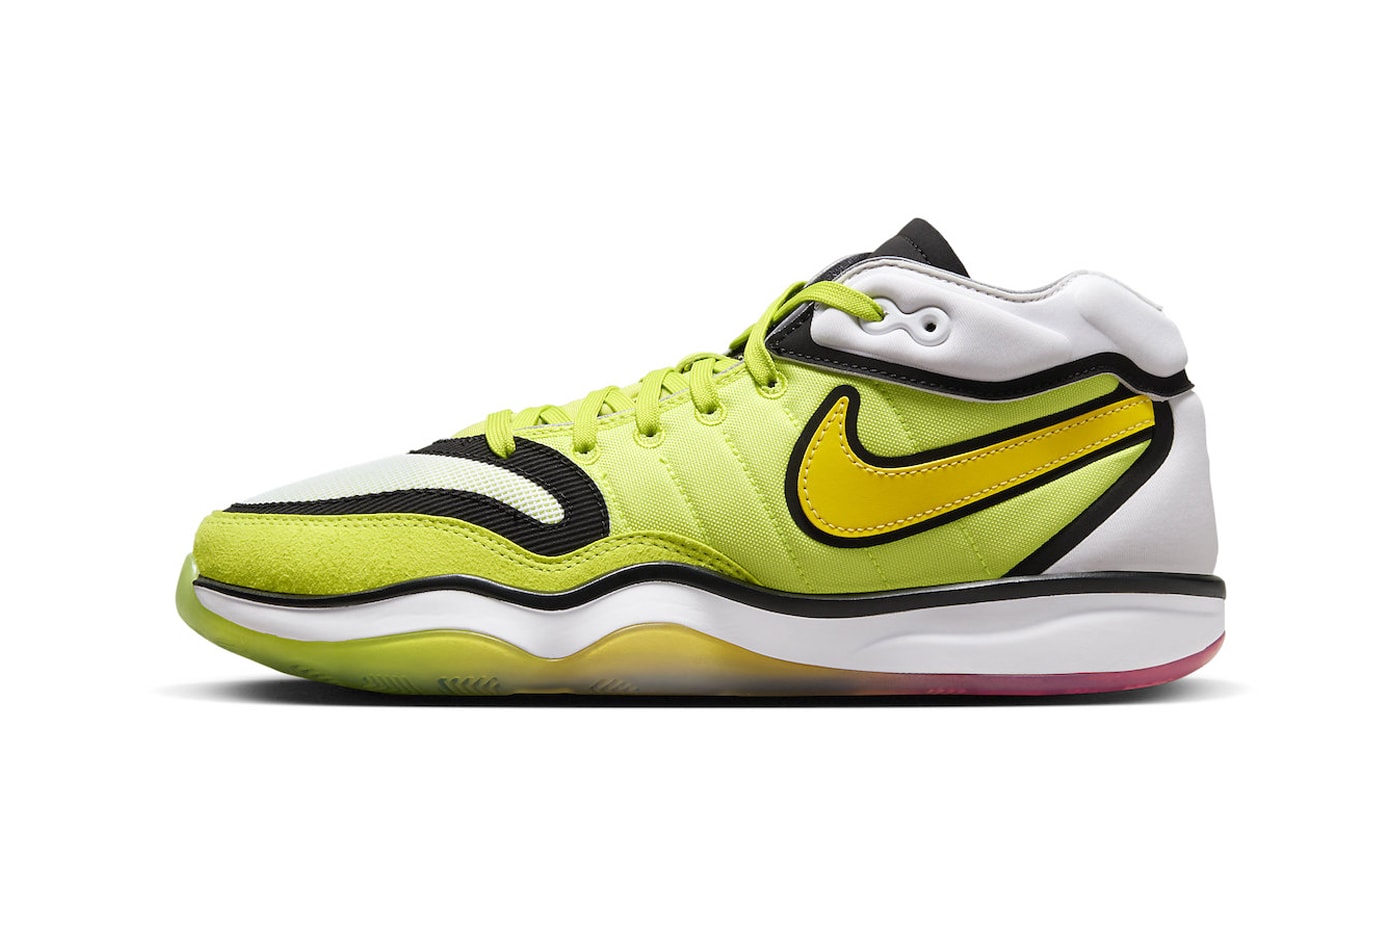 Official Look Nike Air Zoom Hustle 2 "Talaria" DJ9404-300 Cyber/Vivid Sulfur-White-Siren Red-Black fall 2023 gt run collection